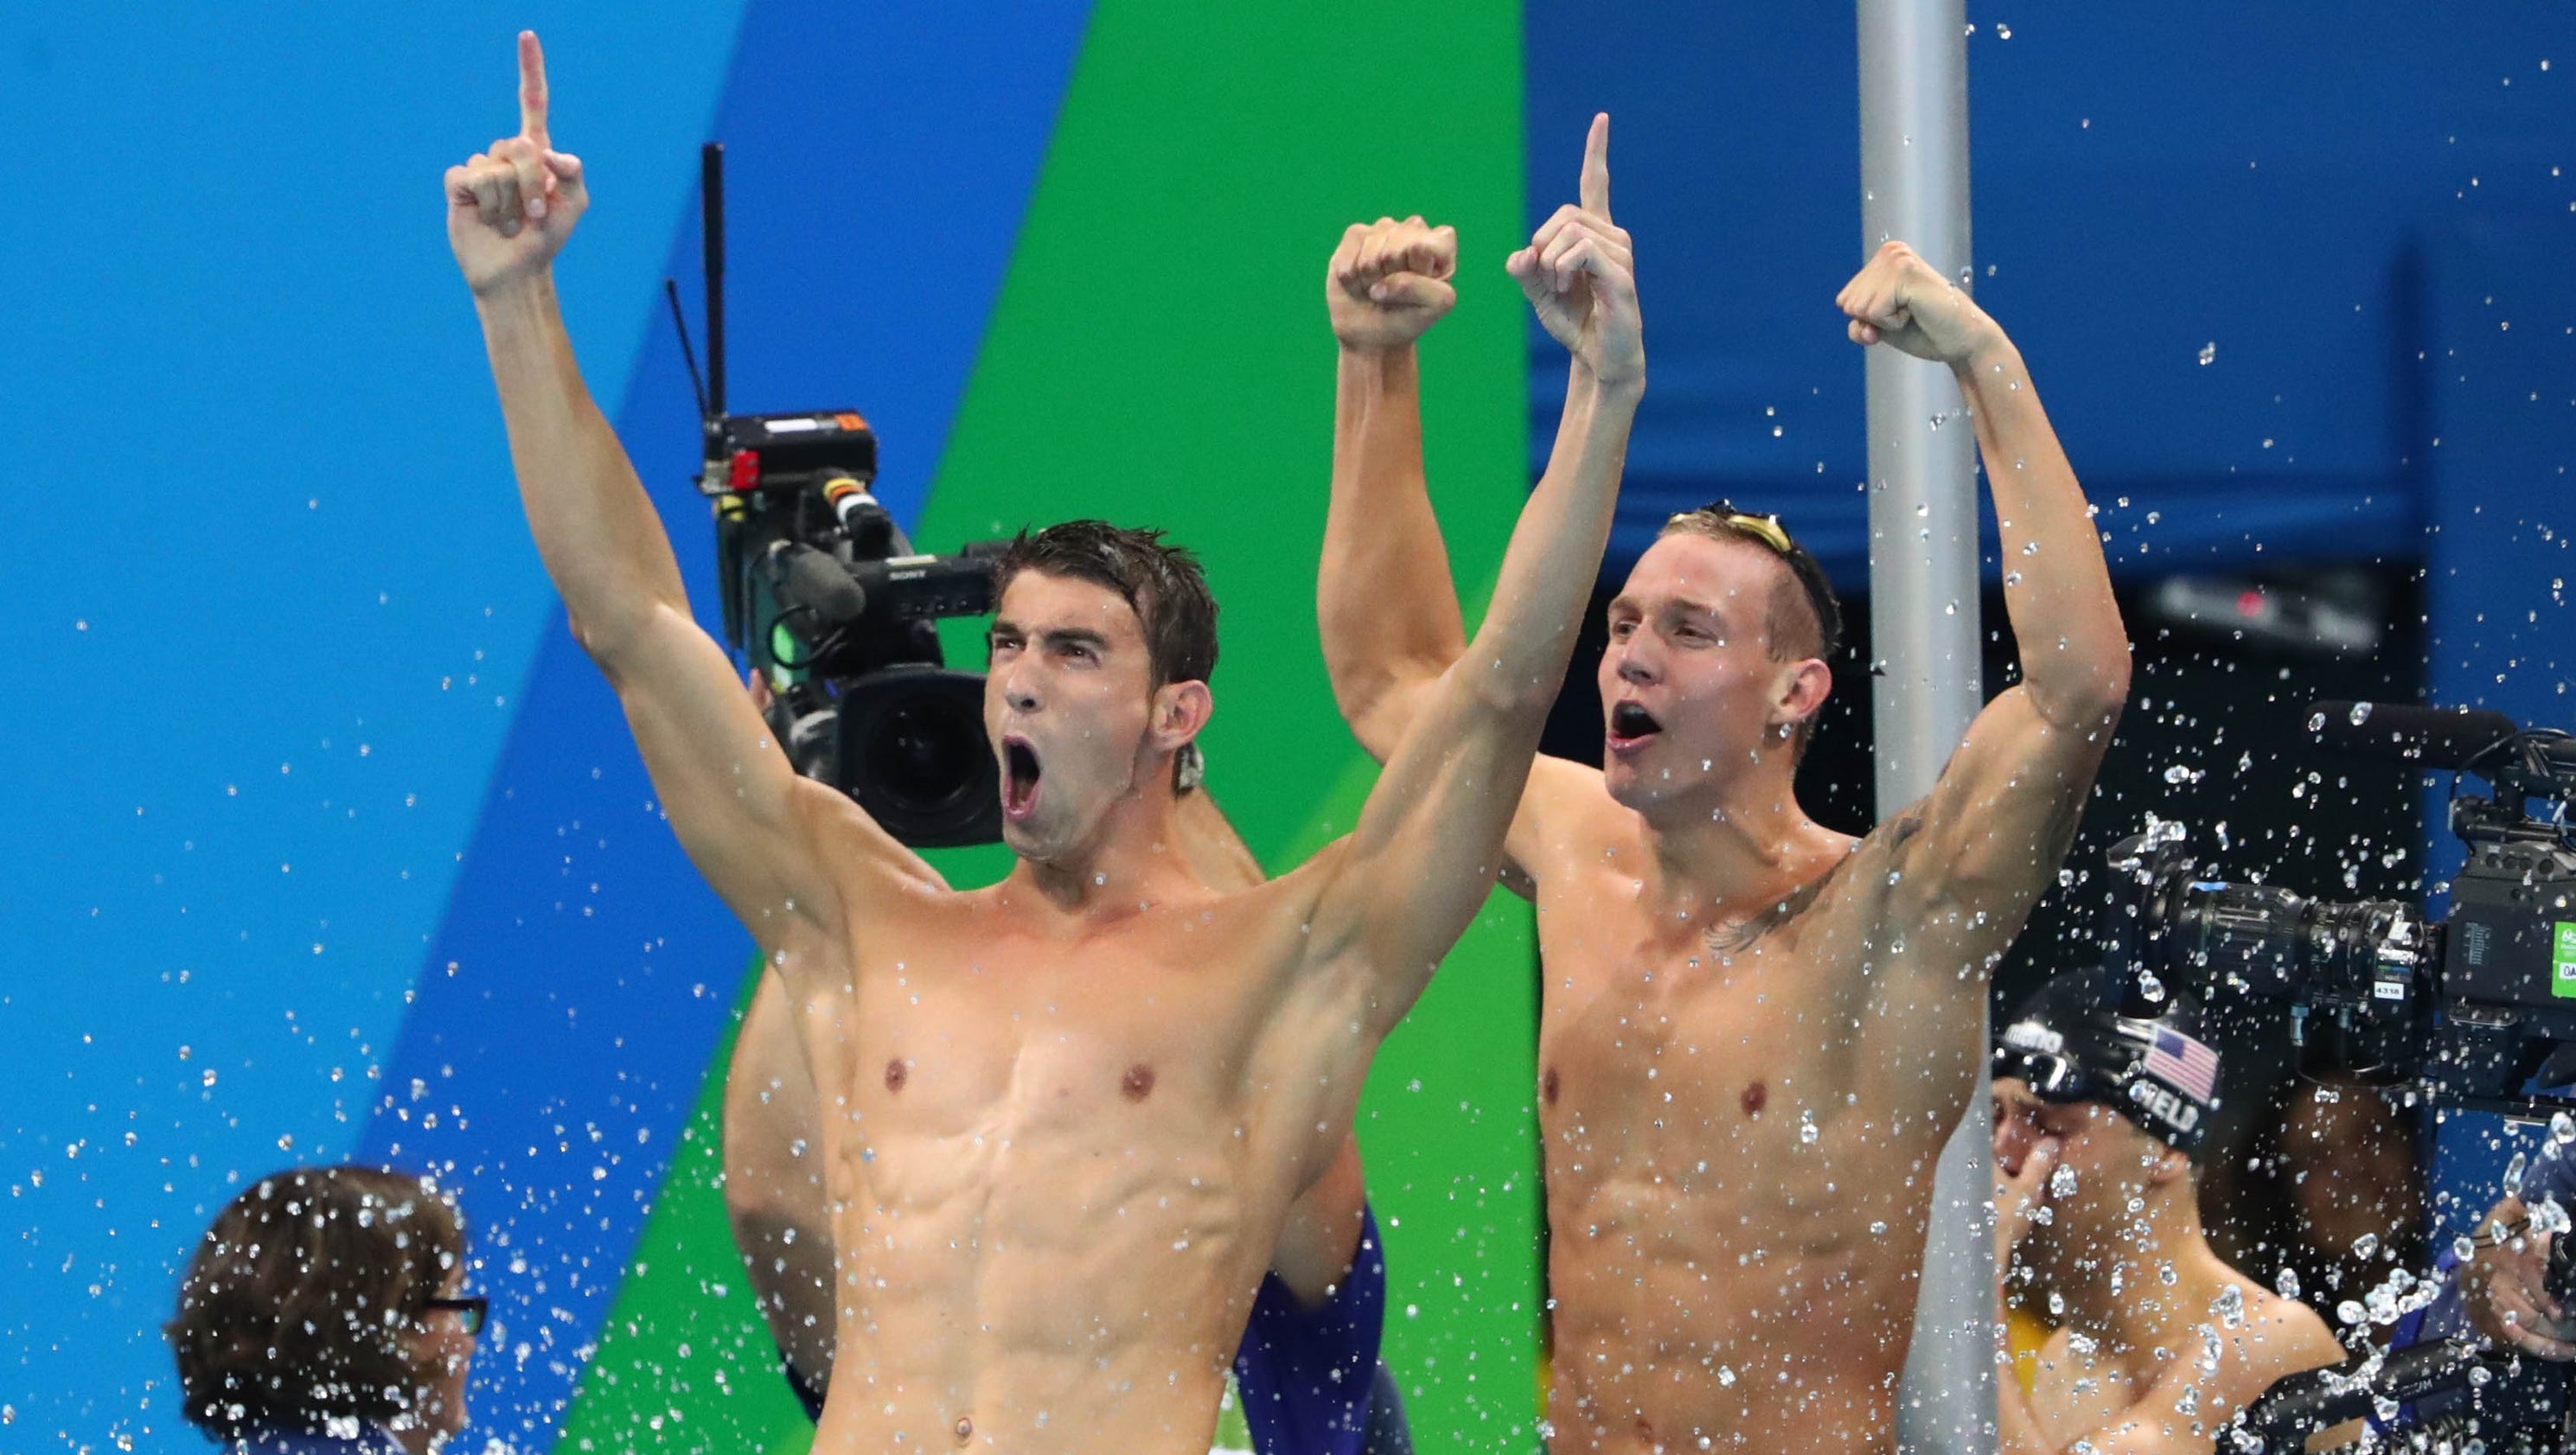 Led by Michael Phelps, U.S. men win gold in 400 freestyle relay3200 x 1680